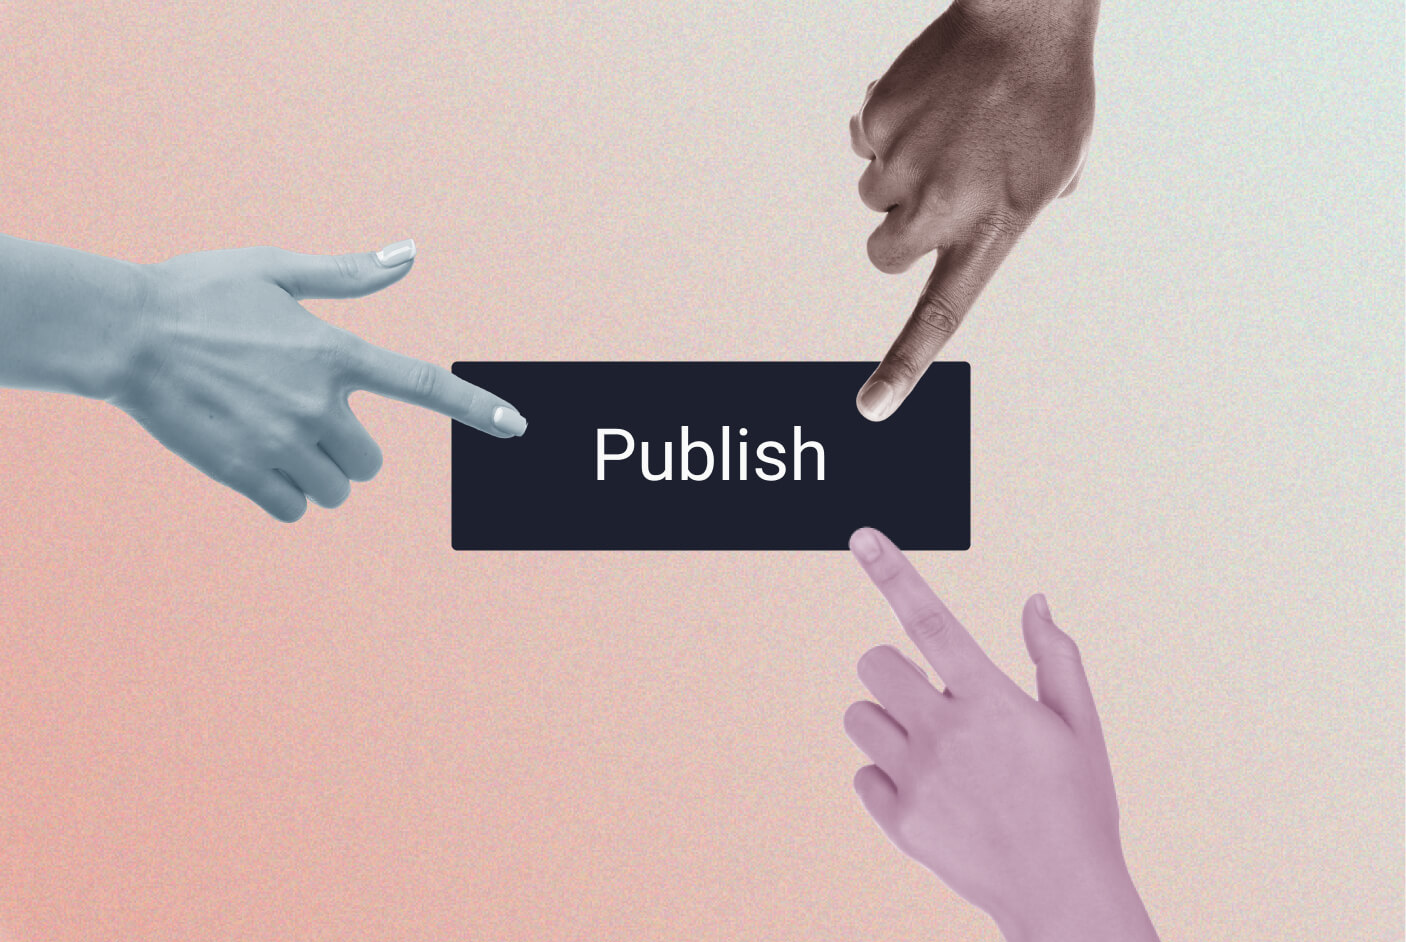 several hands reaching in to push a button that says "publish"